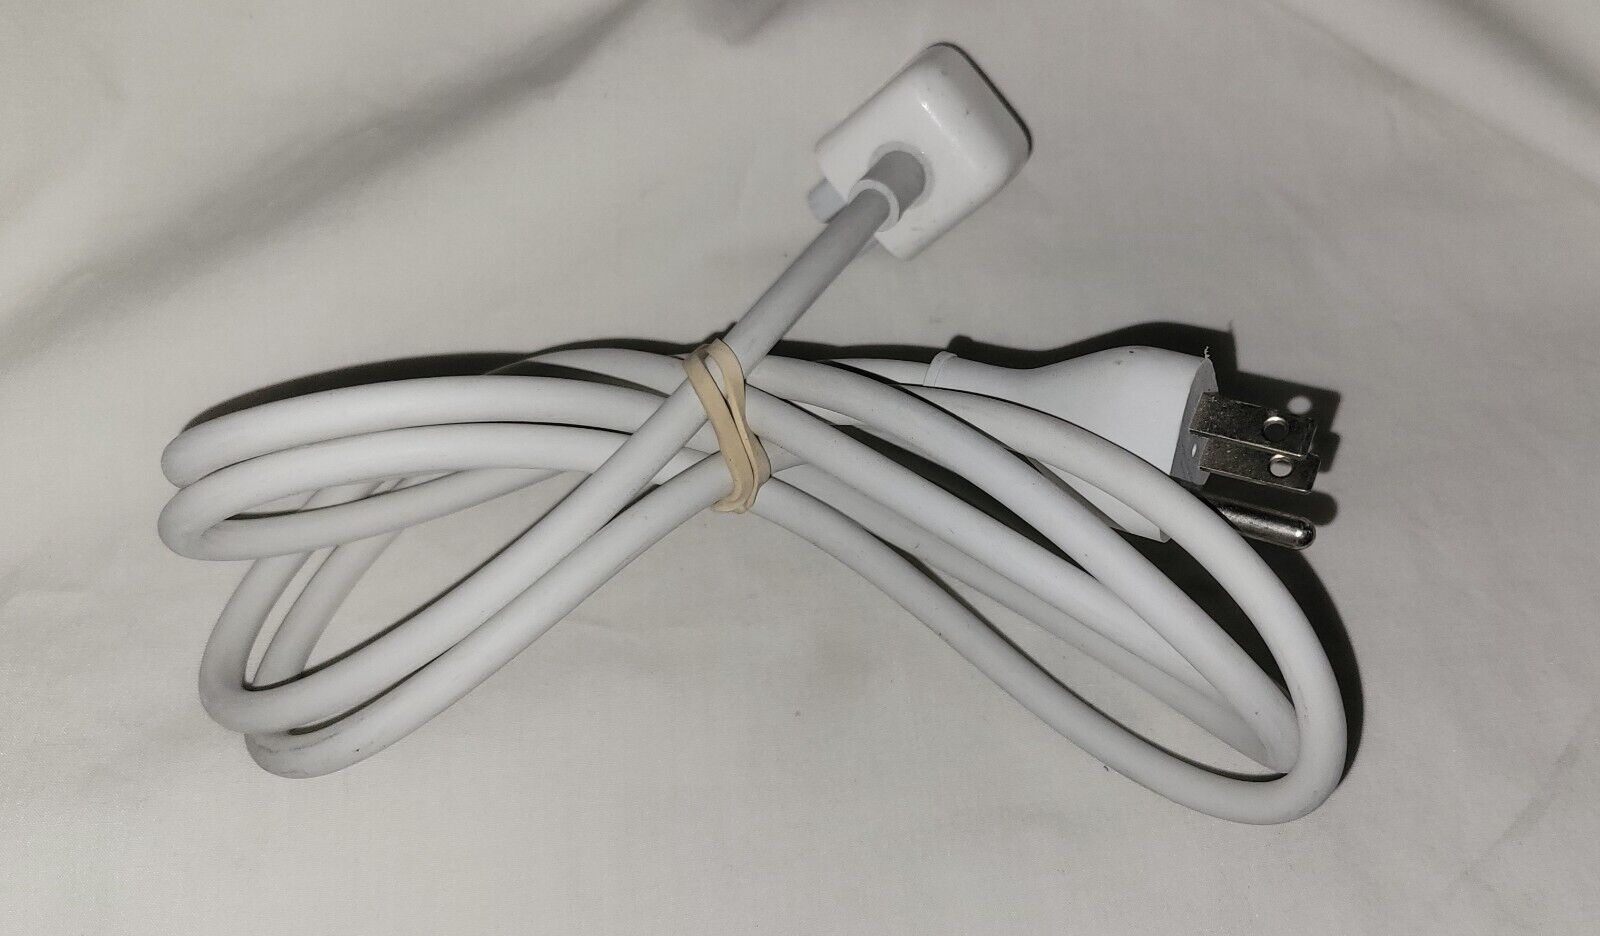 Apple Mac Macbook Power Adapter Charger Extension Cord Cable 6 Ft oem no box